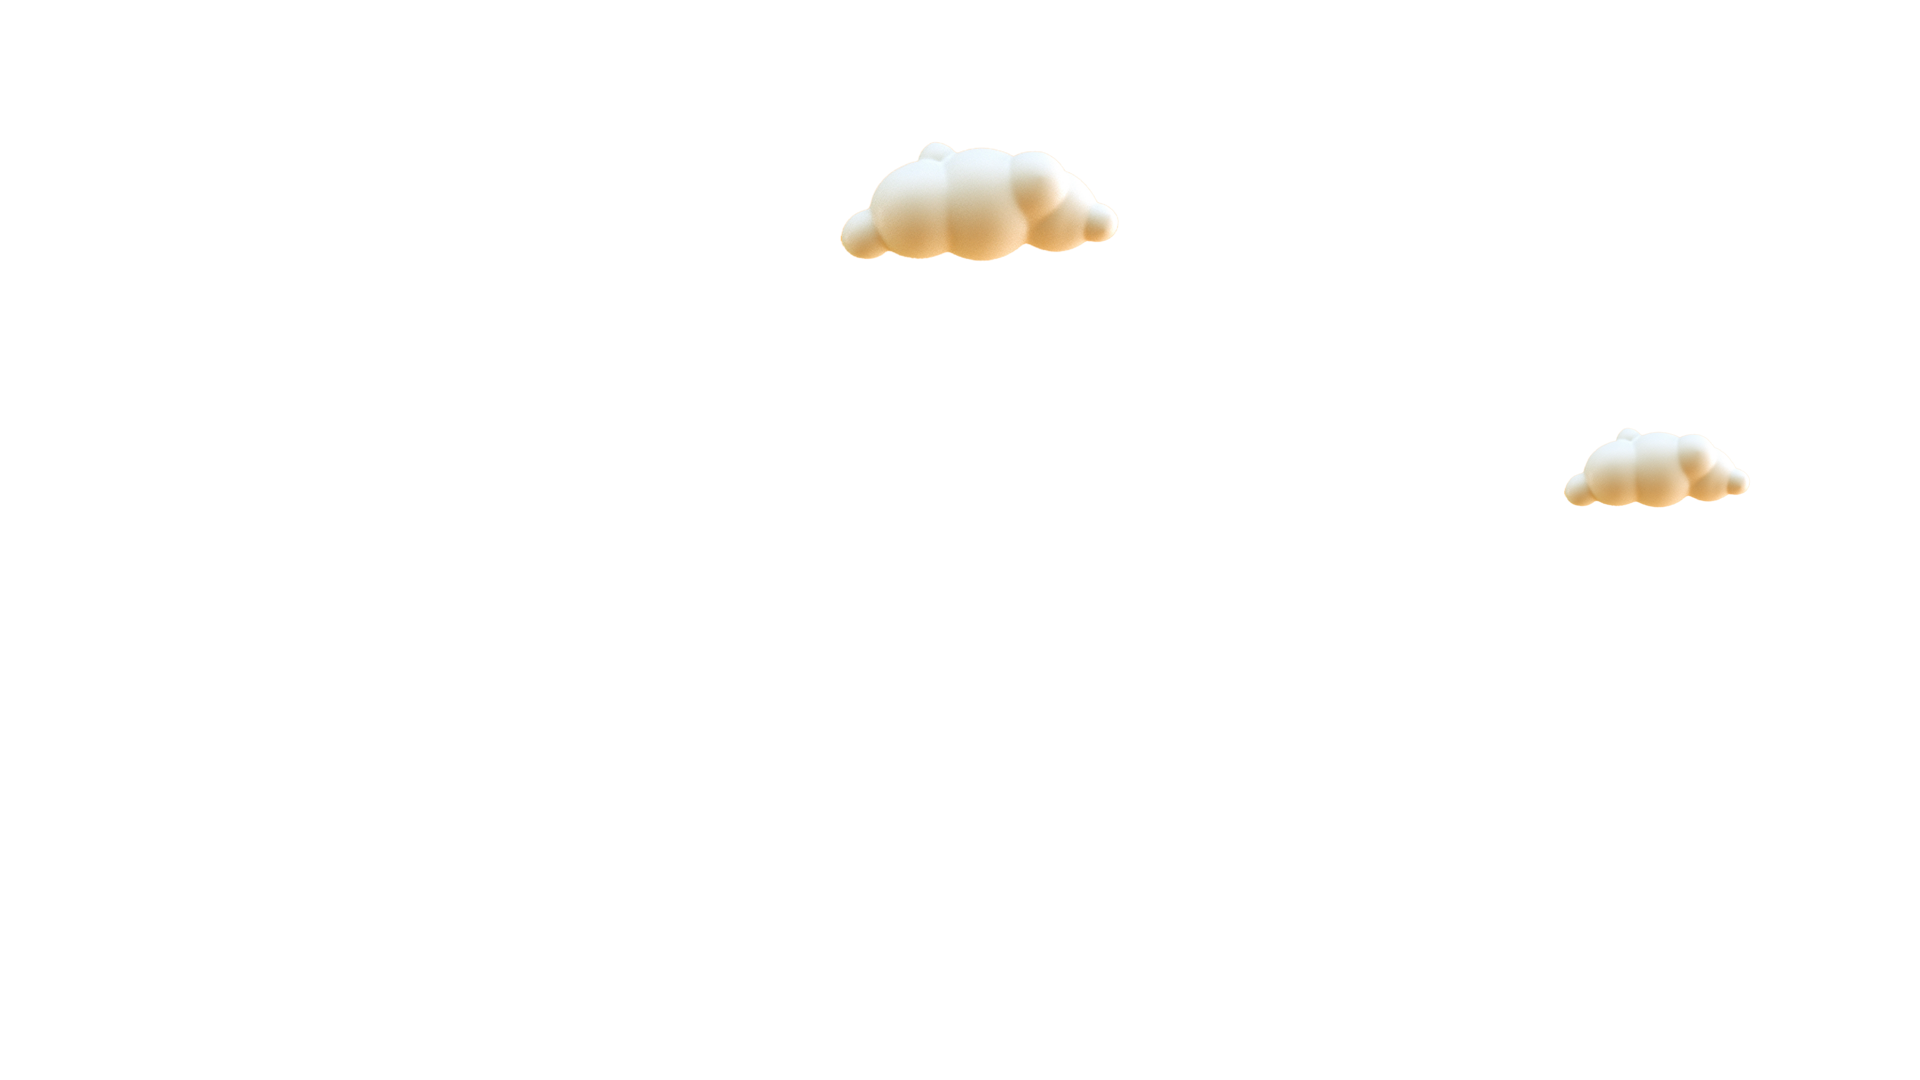 Three cartoon-style clouds on a black background.